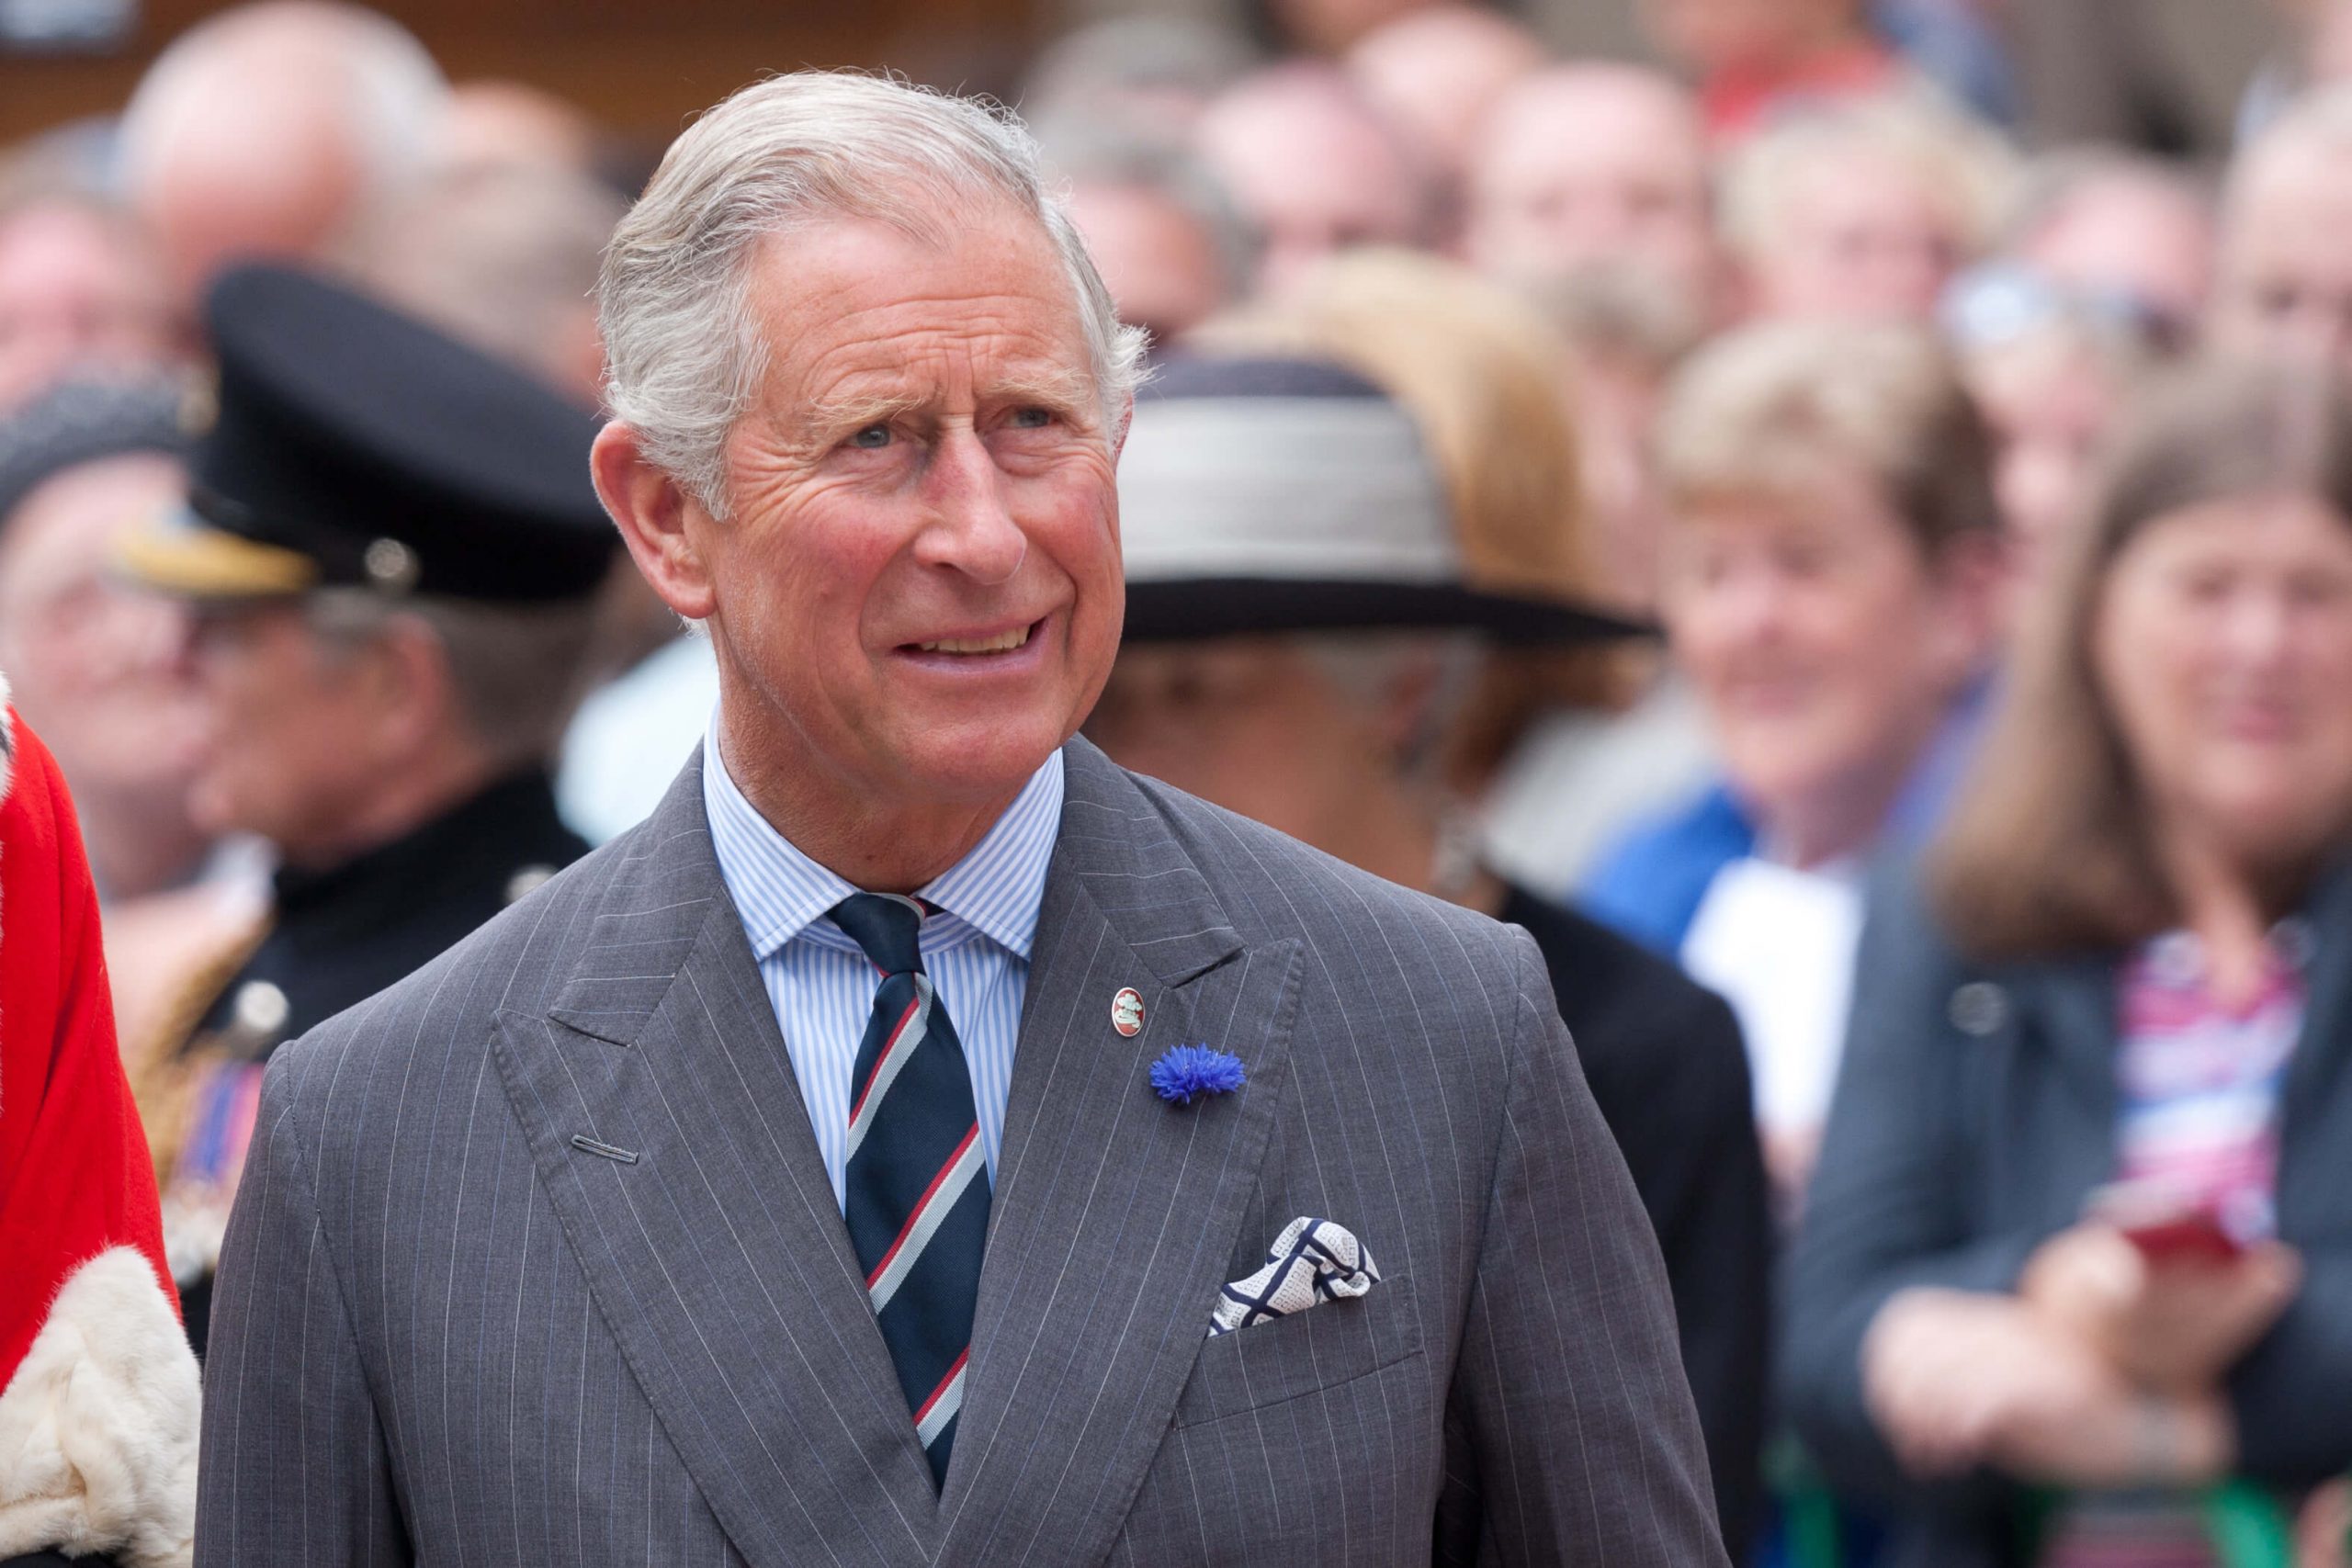 Prince Charles To Become the Next King of the UK